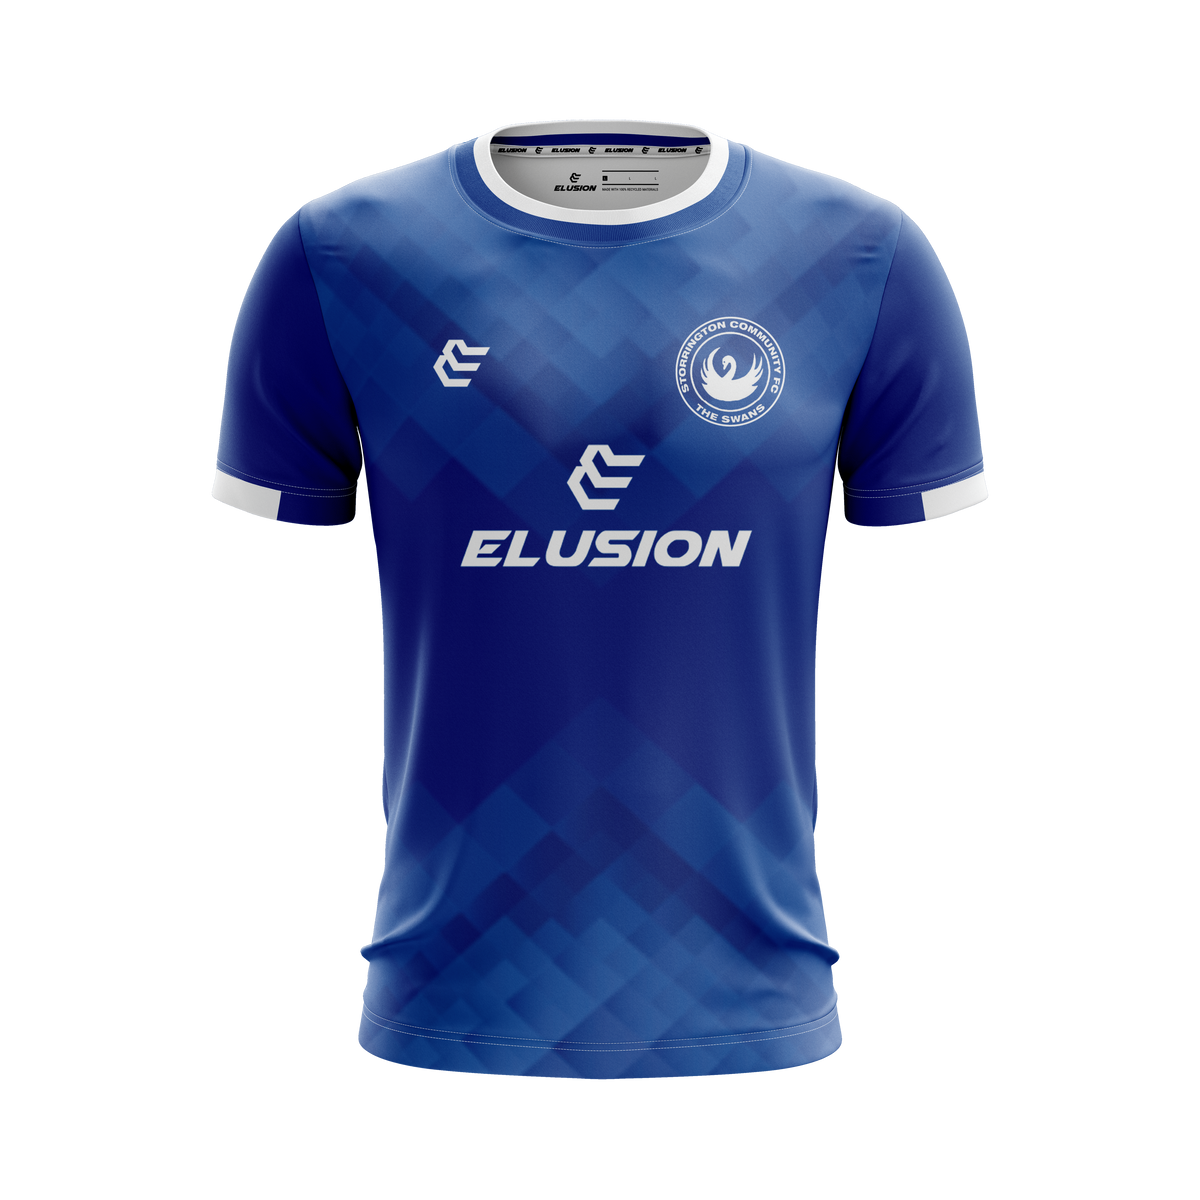 home_jersey_front_view.png__PID:10946a14-98f6-4147-8a12-677b9825882a